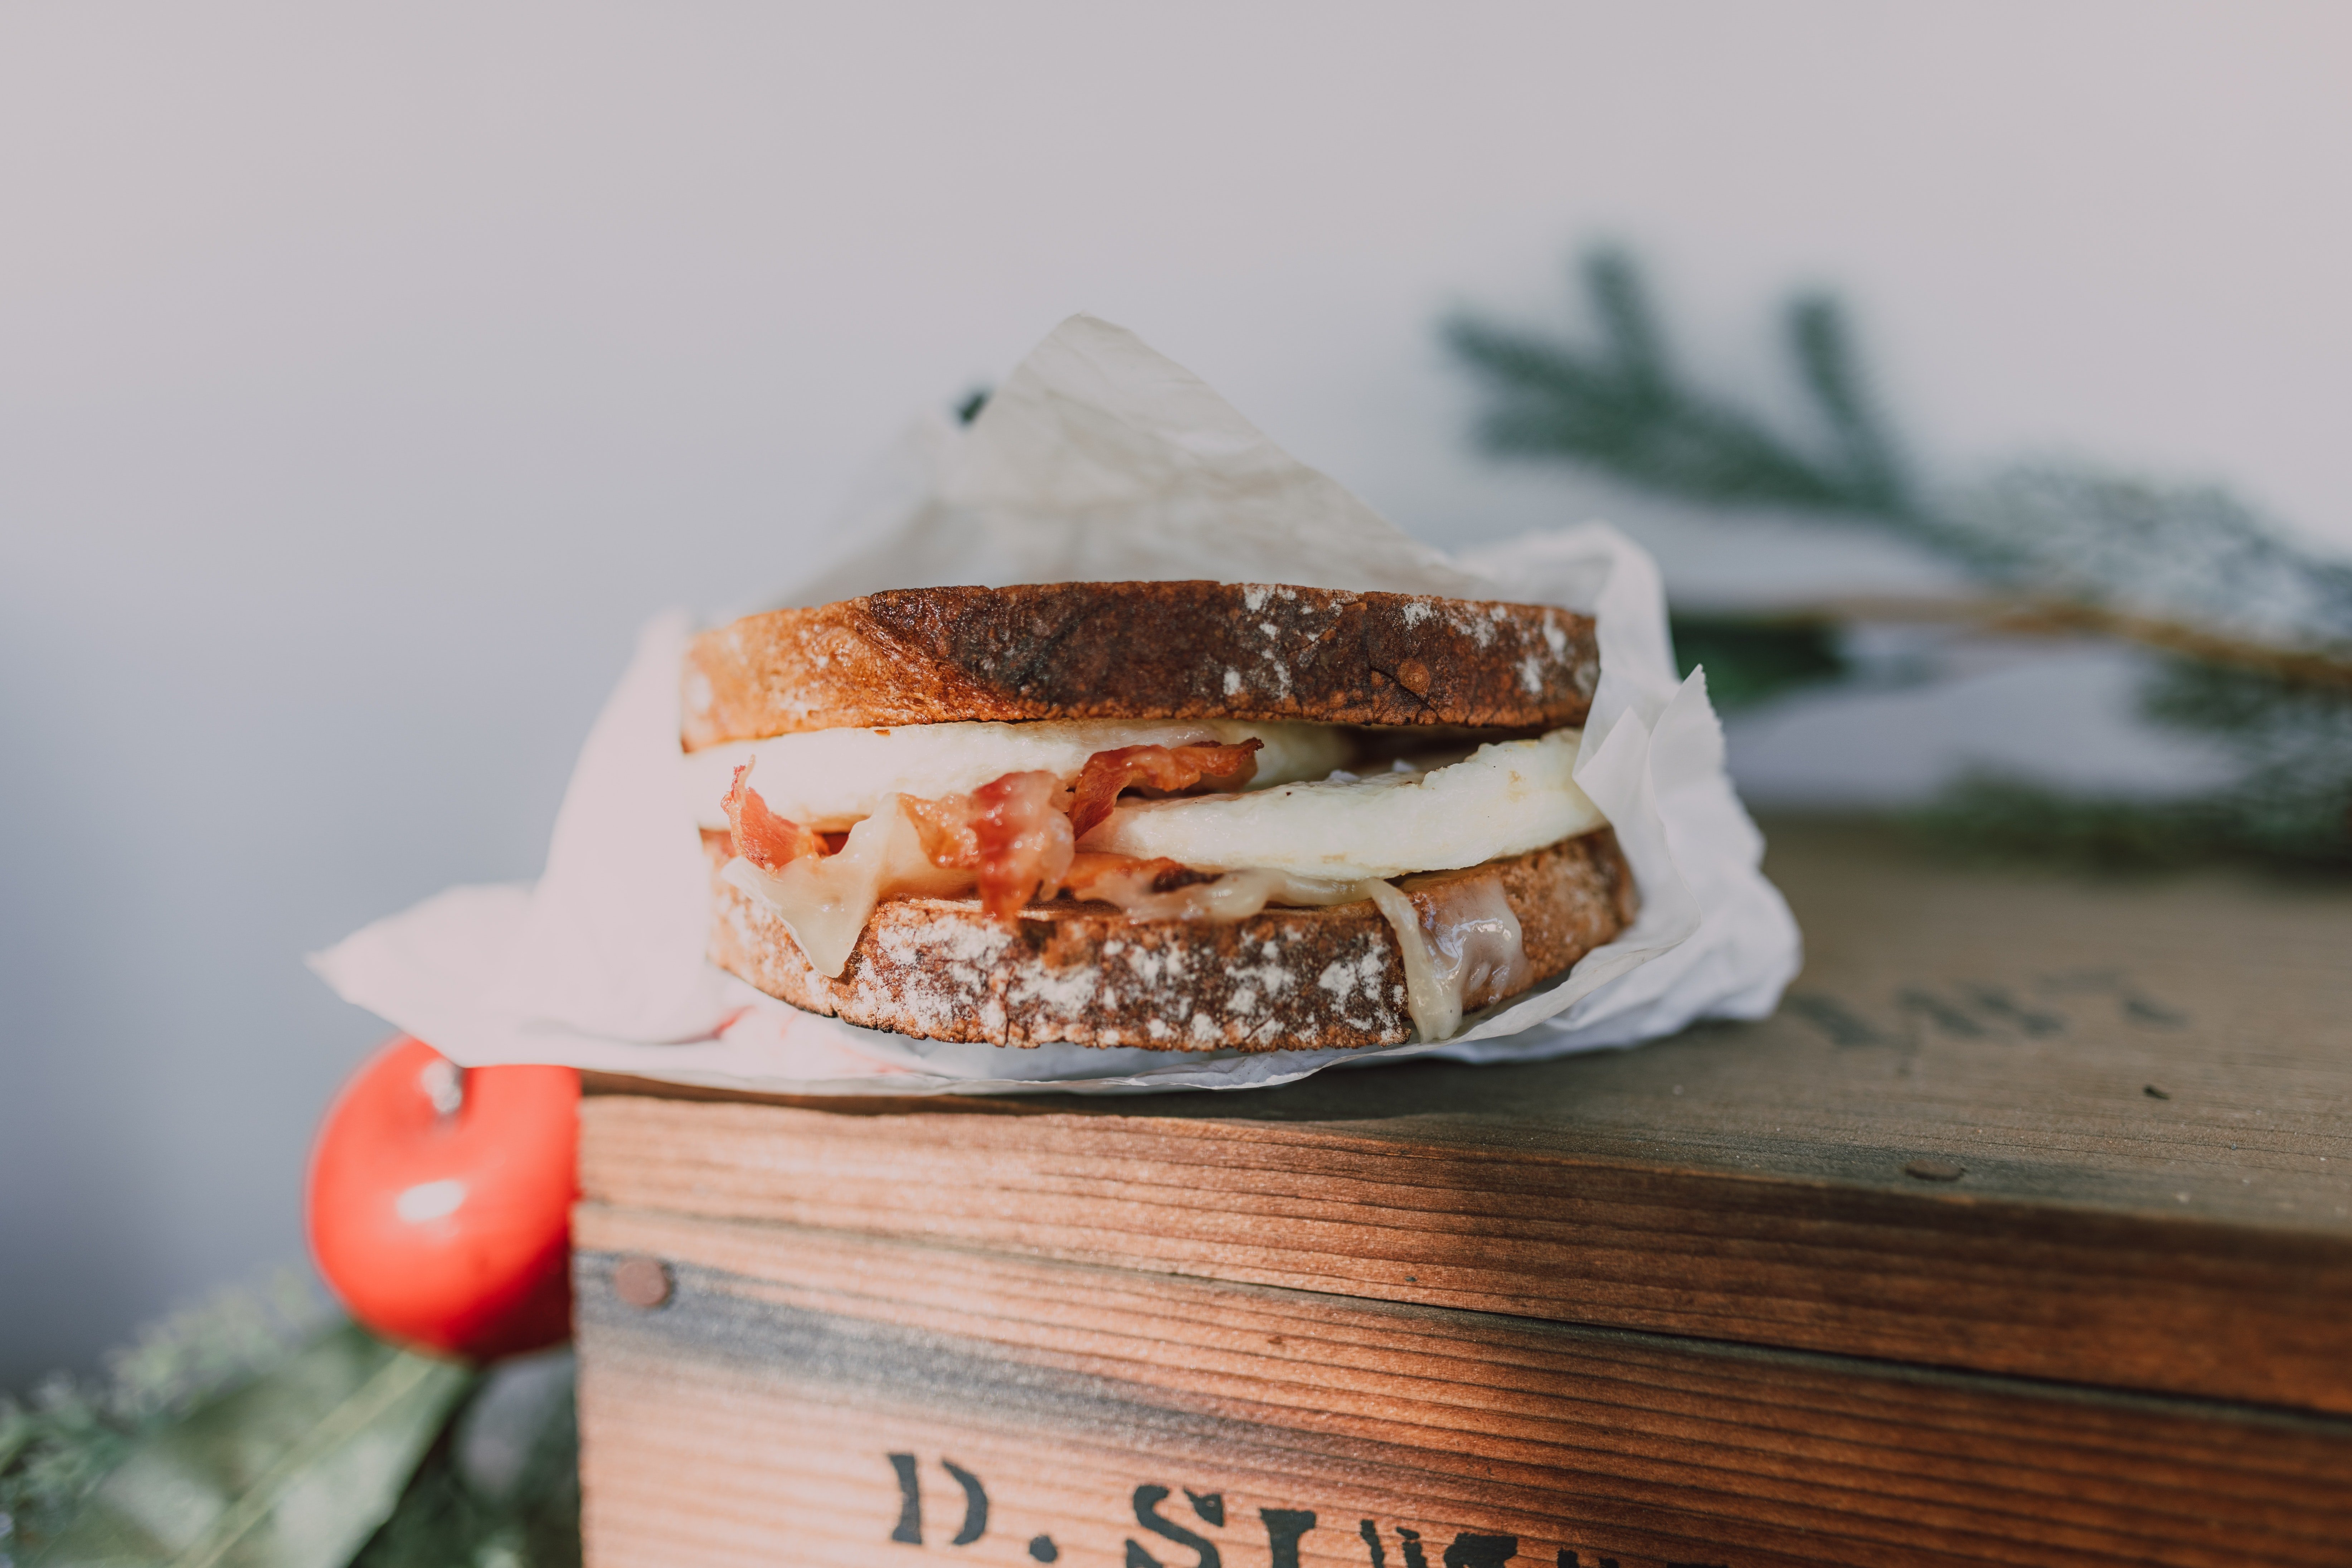 Mark had no idea where his missing sandwich was. | Photo: Pexels/RODNAE Productions